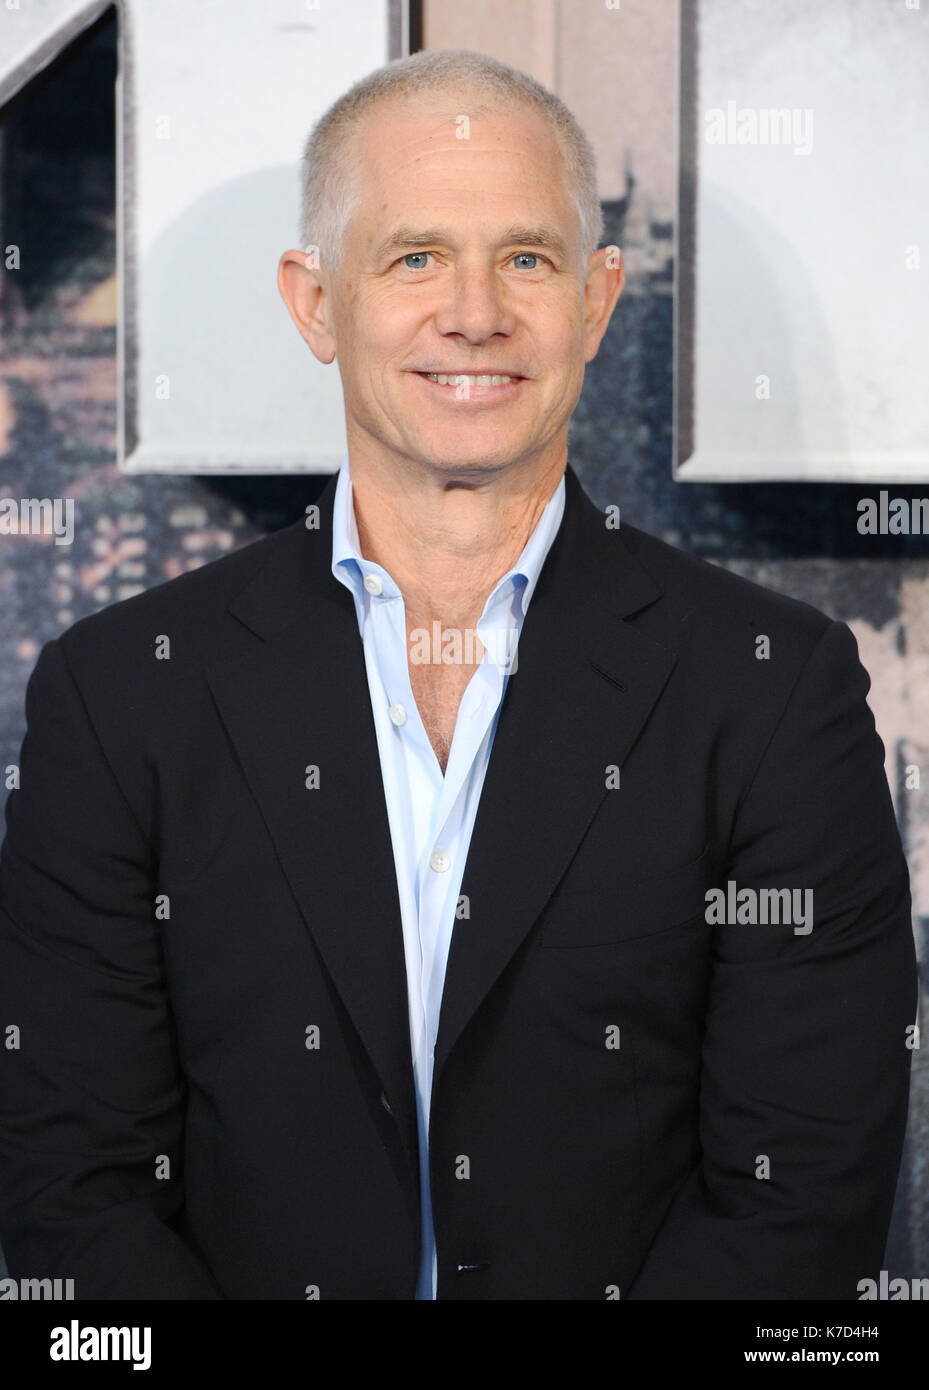 Photo Must Be Credited ©Kate Green/Alpha Press 079965 09/05/2016 Hutch Parker at the X Men Apocalypse Global Fan Movie Screening held at BFI Imax in London Stock Photo